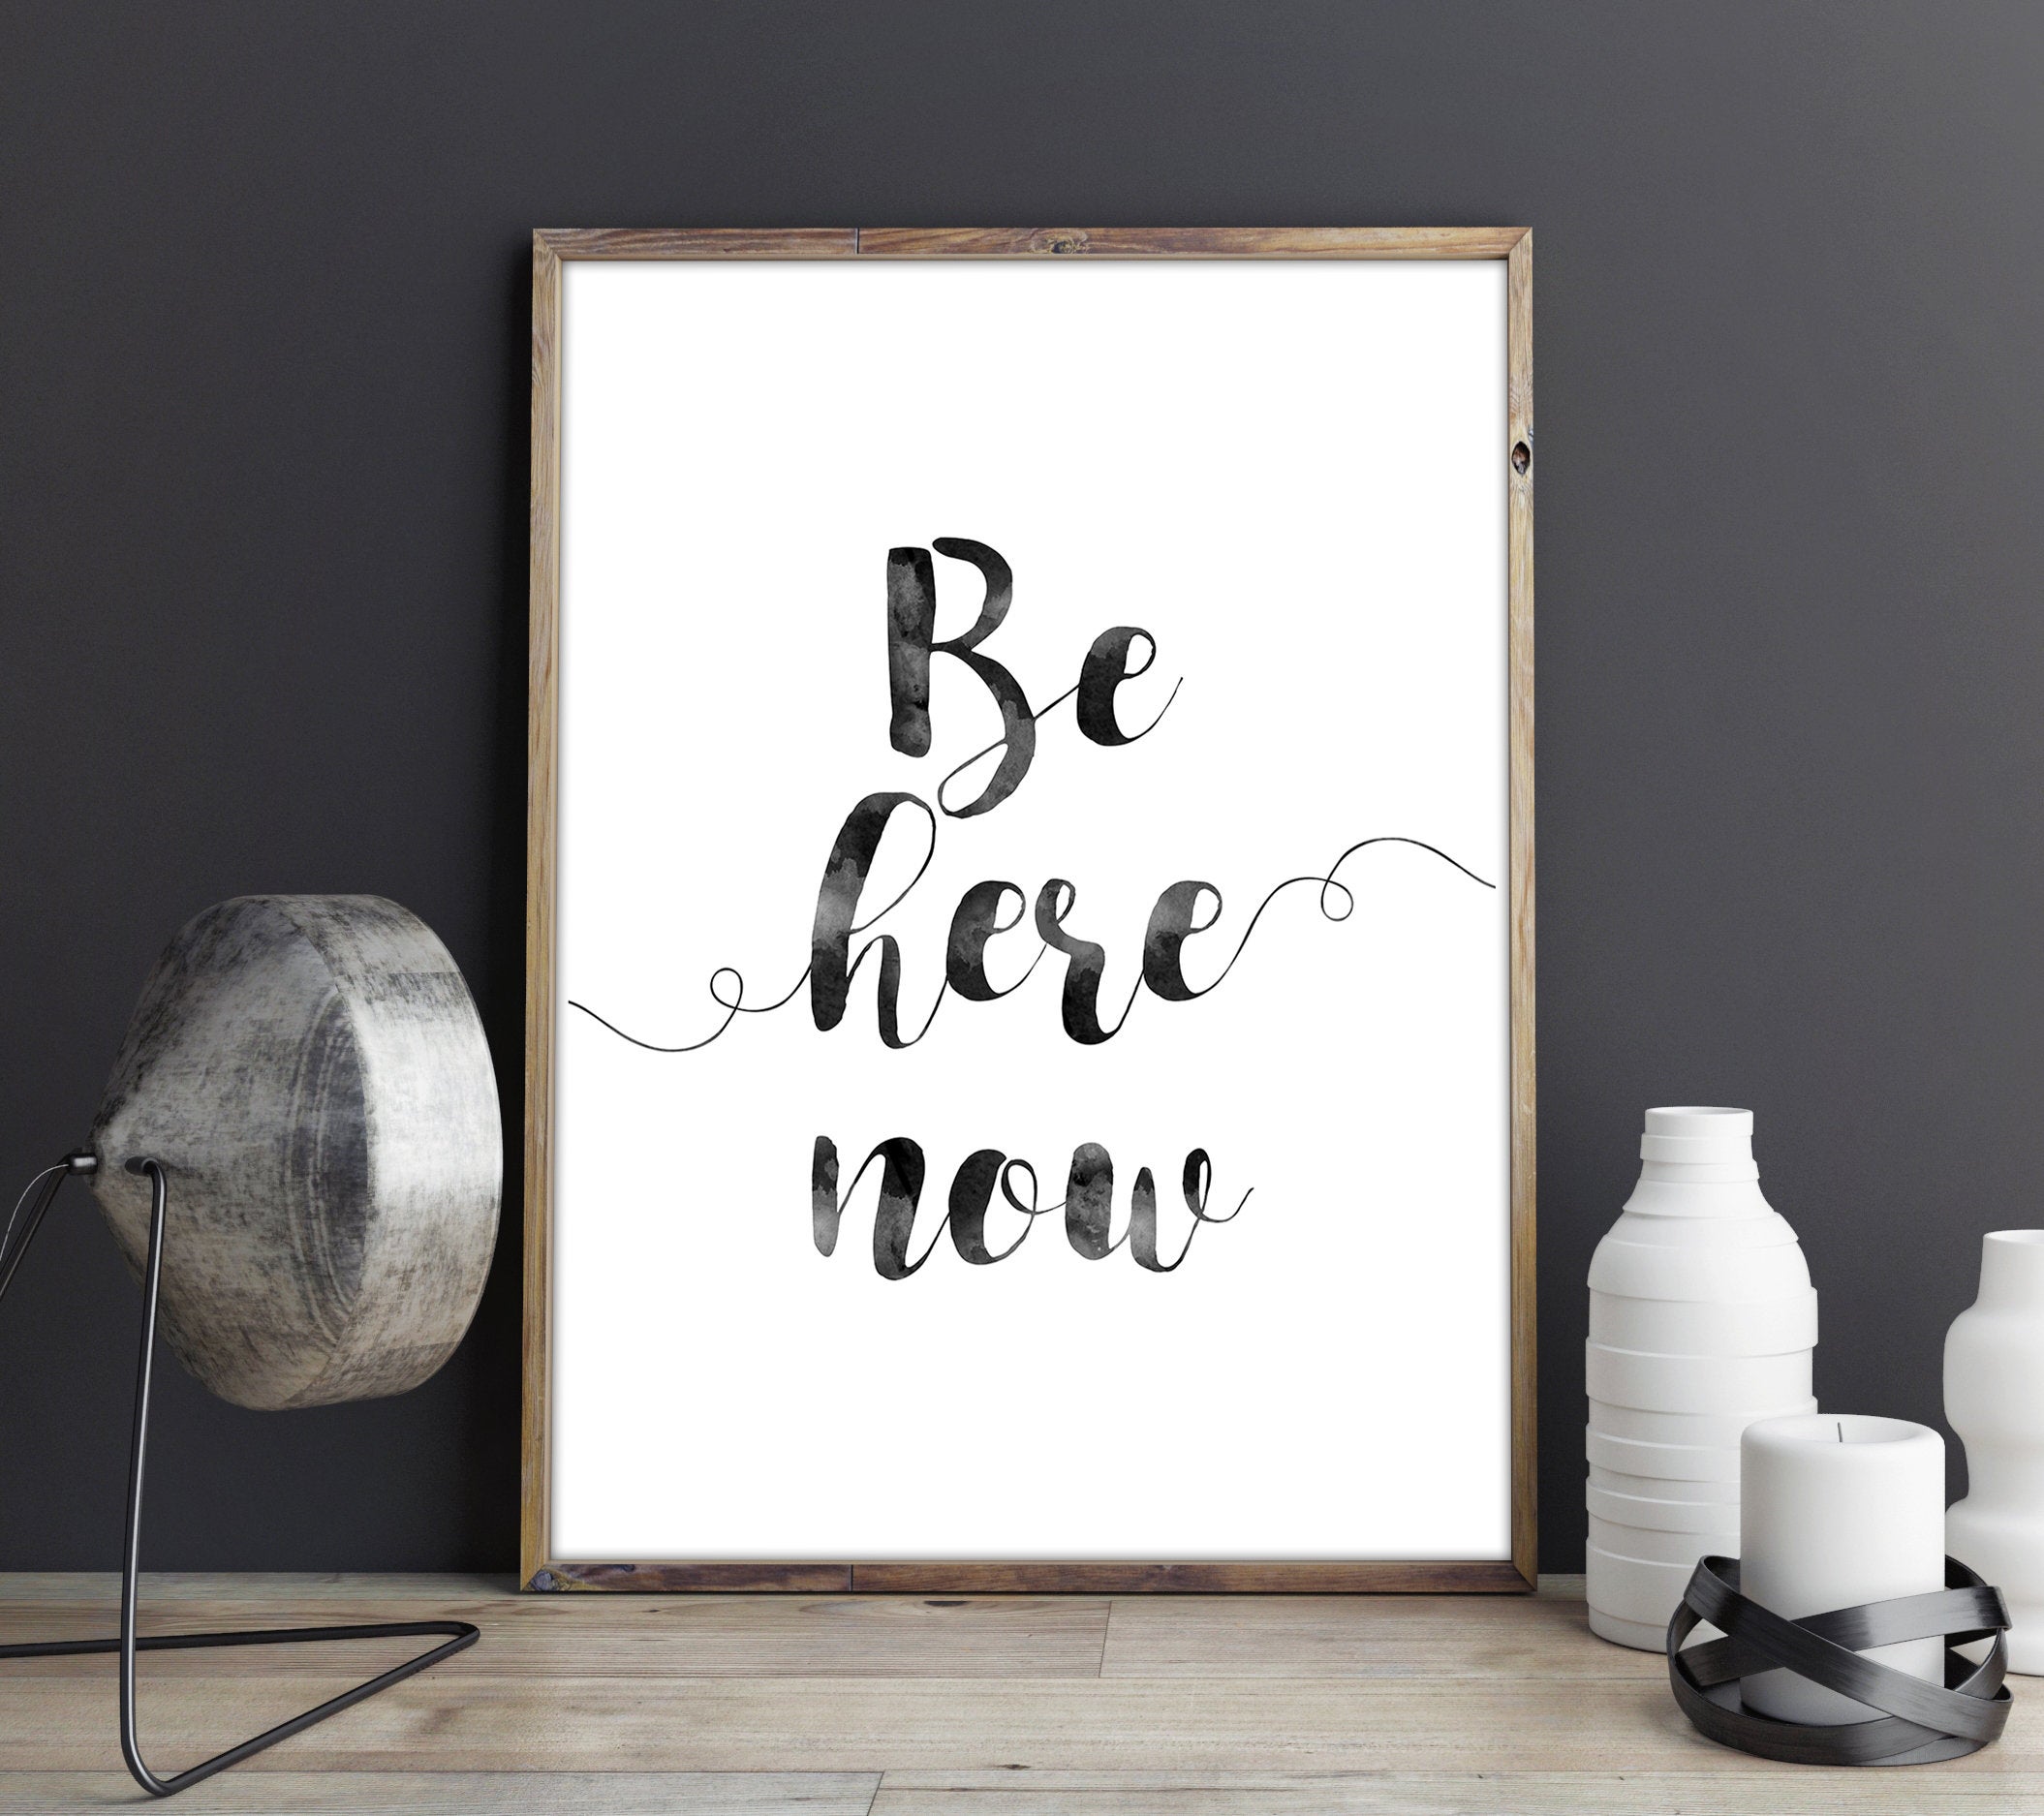 Motivational Poster Be Here Now,Print Wall Art,Inspirational Print, Room Decor